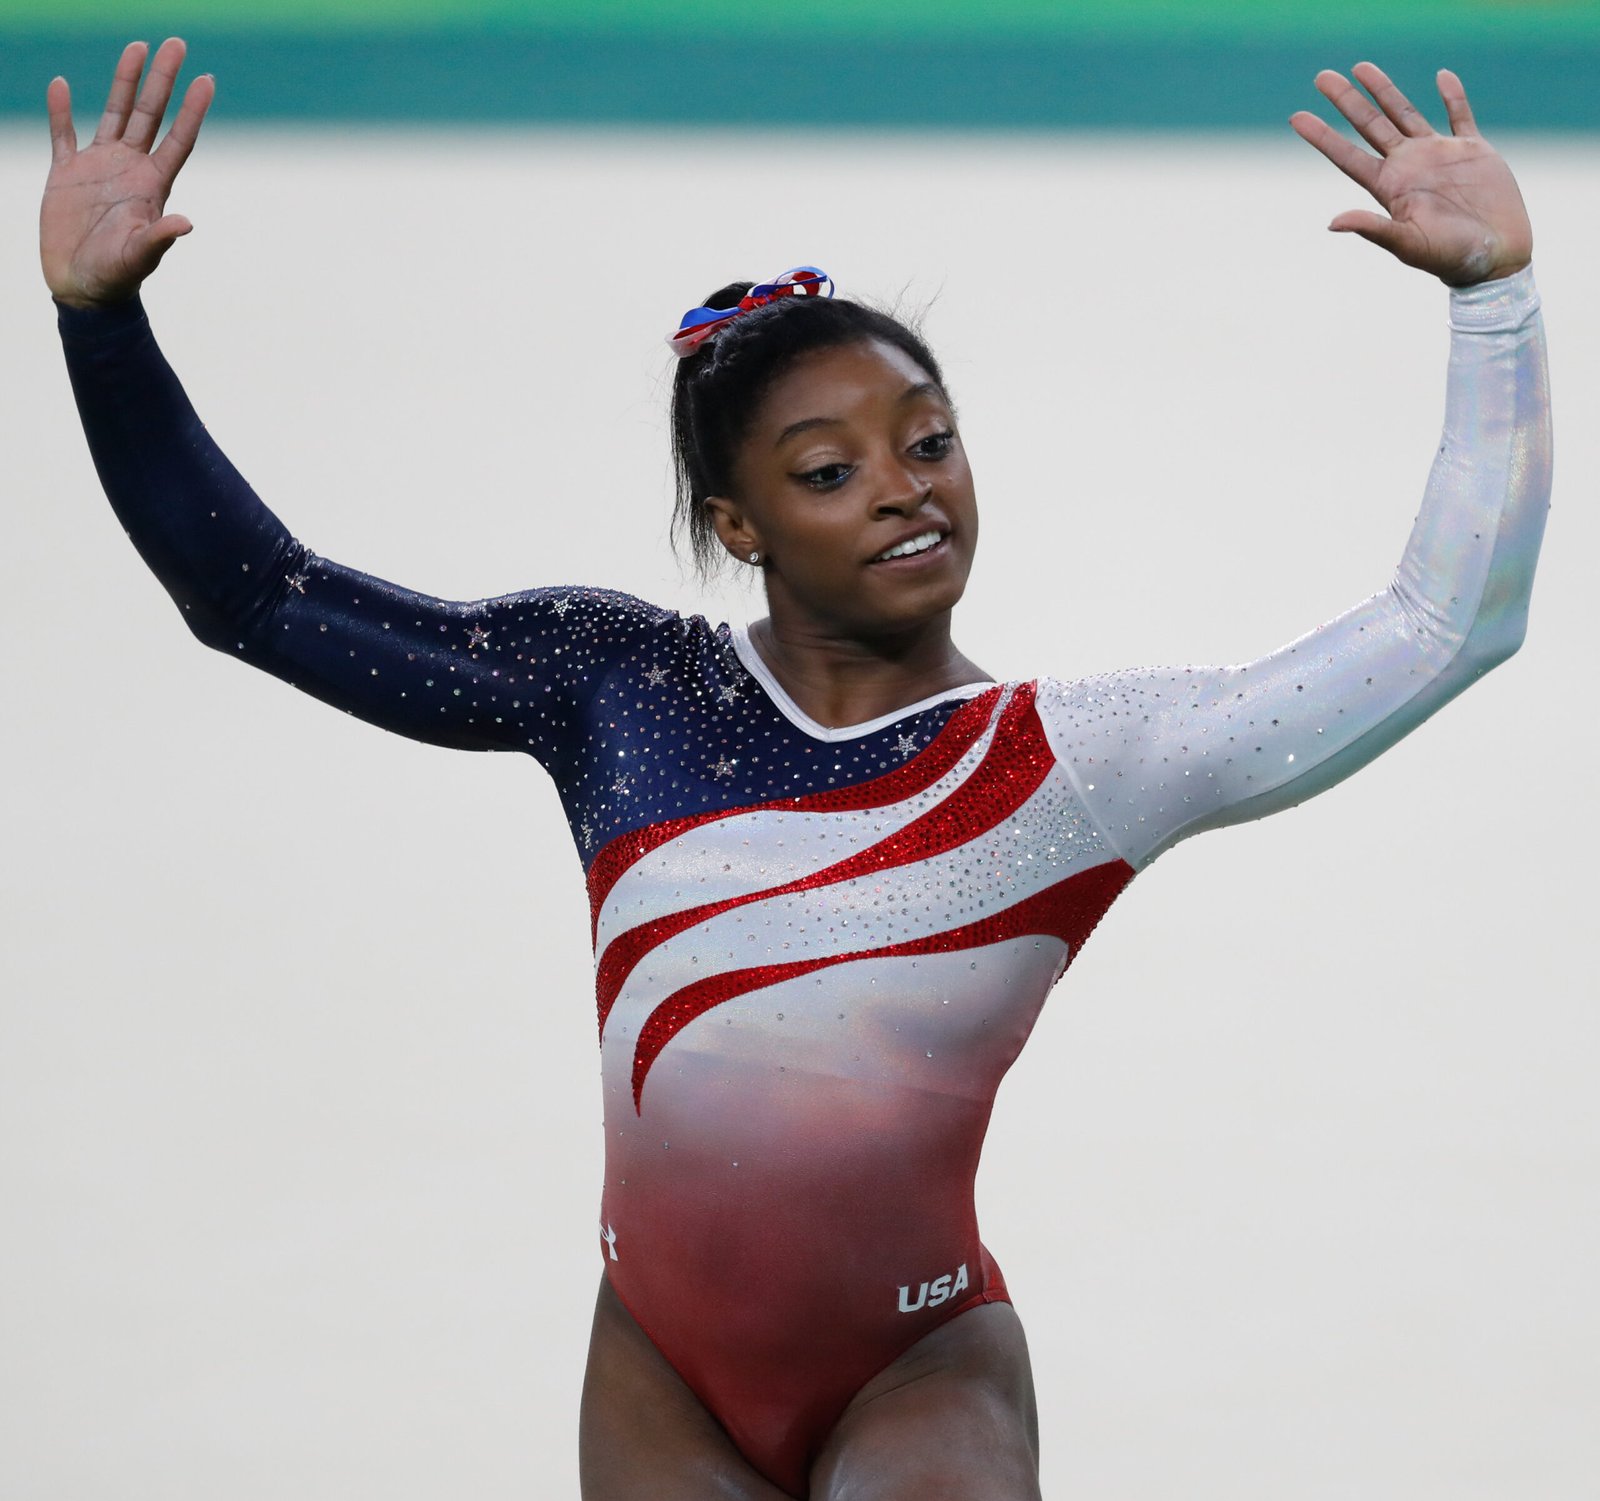 Simone Biles Performs Historic Yurchenko Double Pike Vault With Jump To Be Named After Her - Poke Bowl Cocoabeach